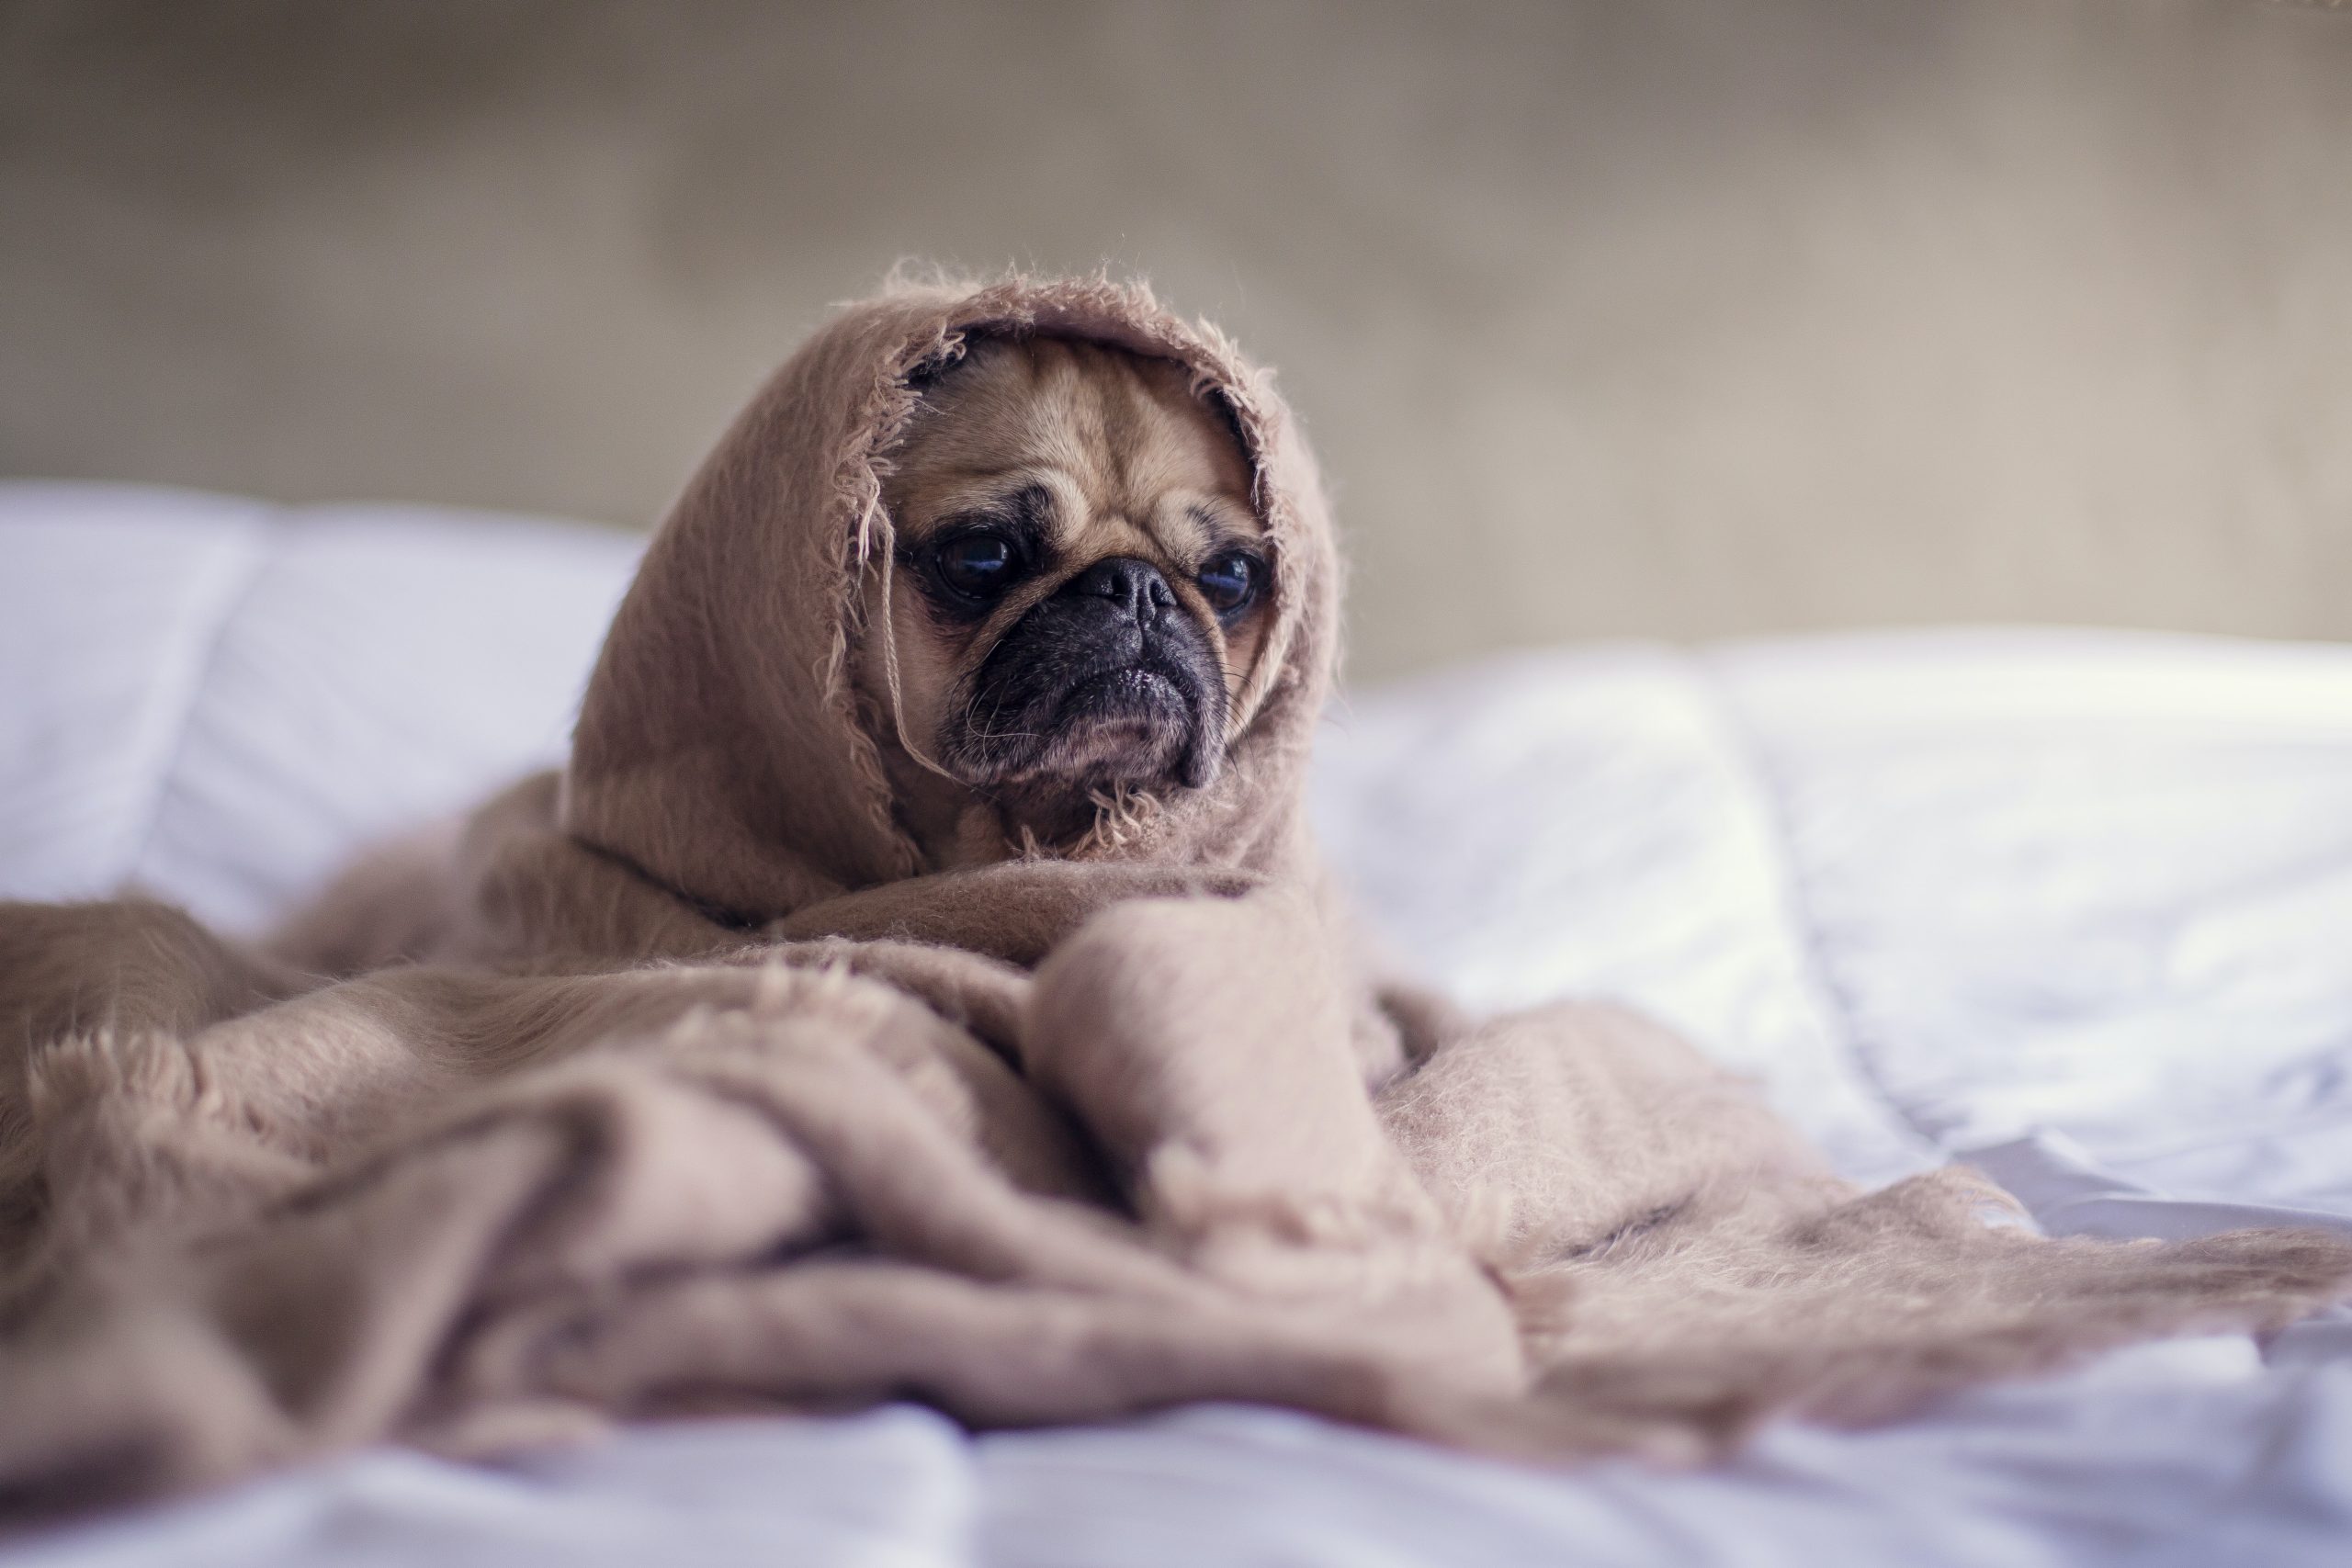 Signs and Signals That Your Dog Is Feeling Sick